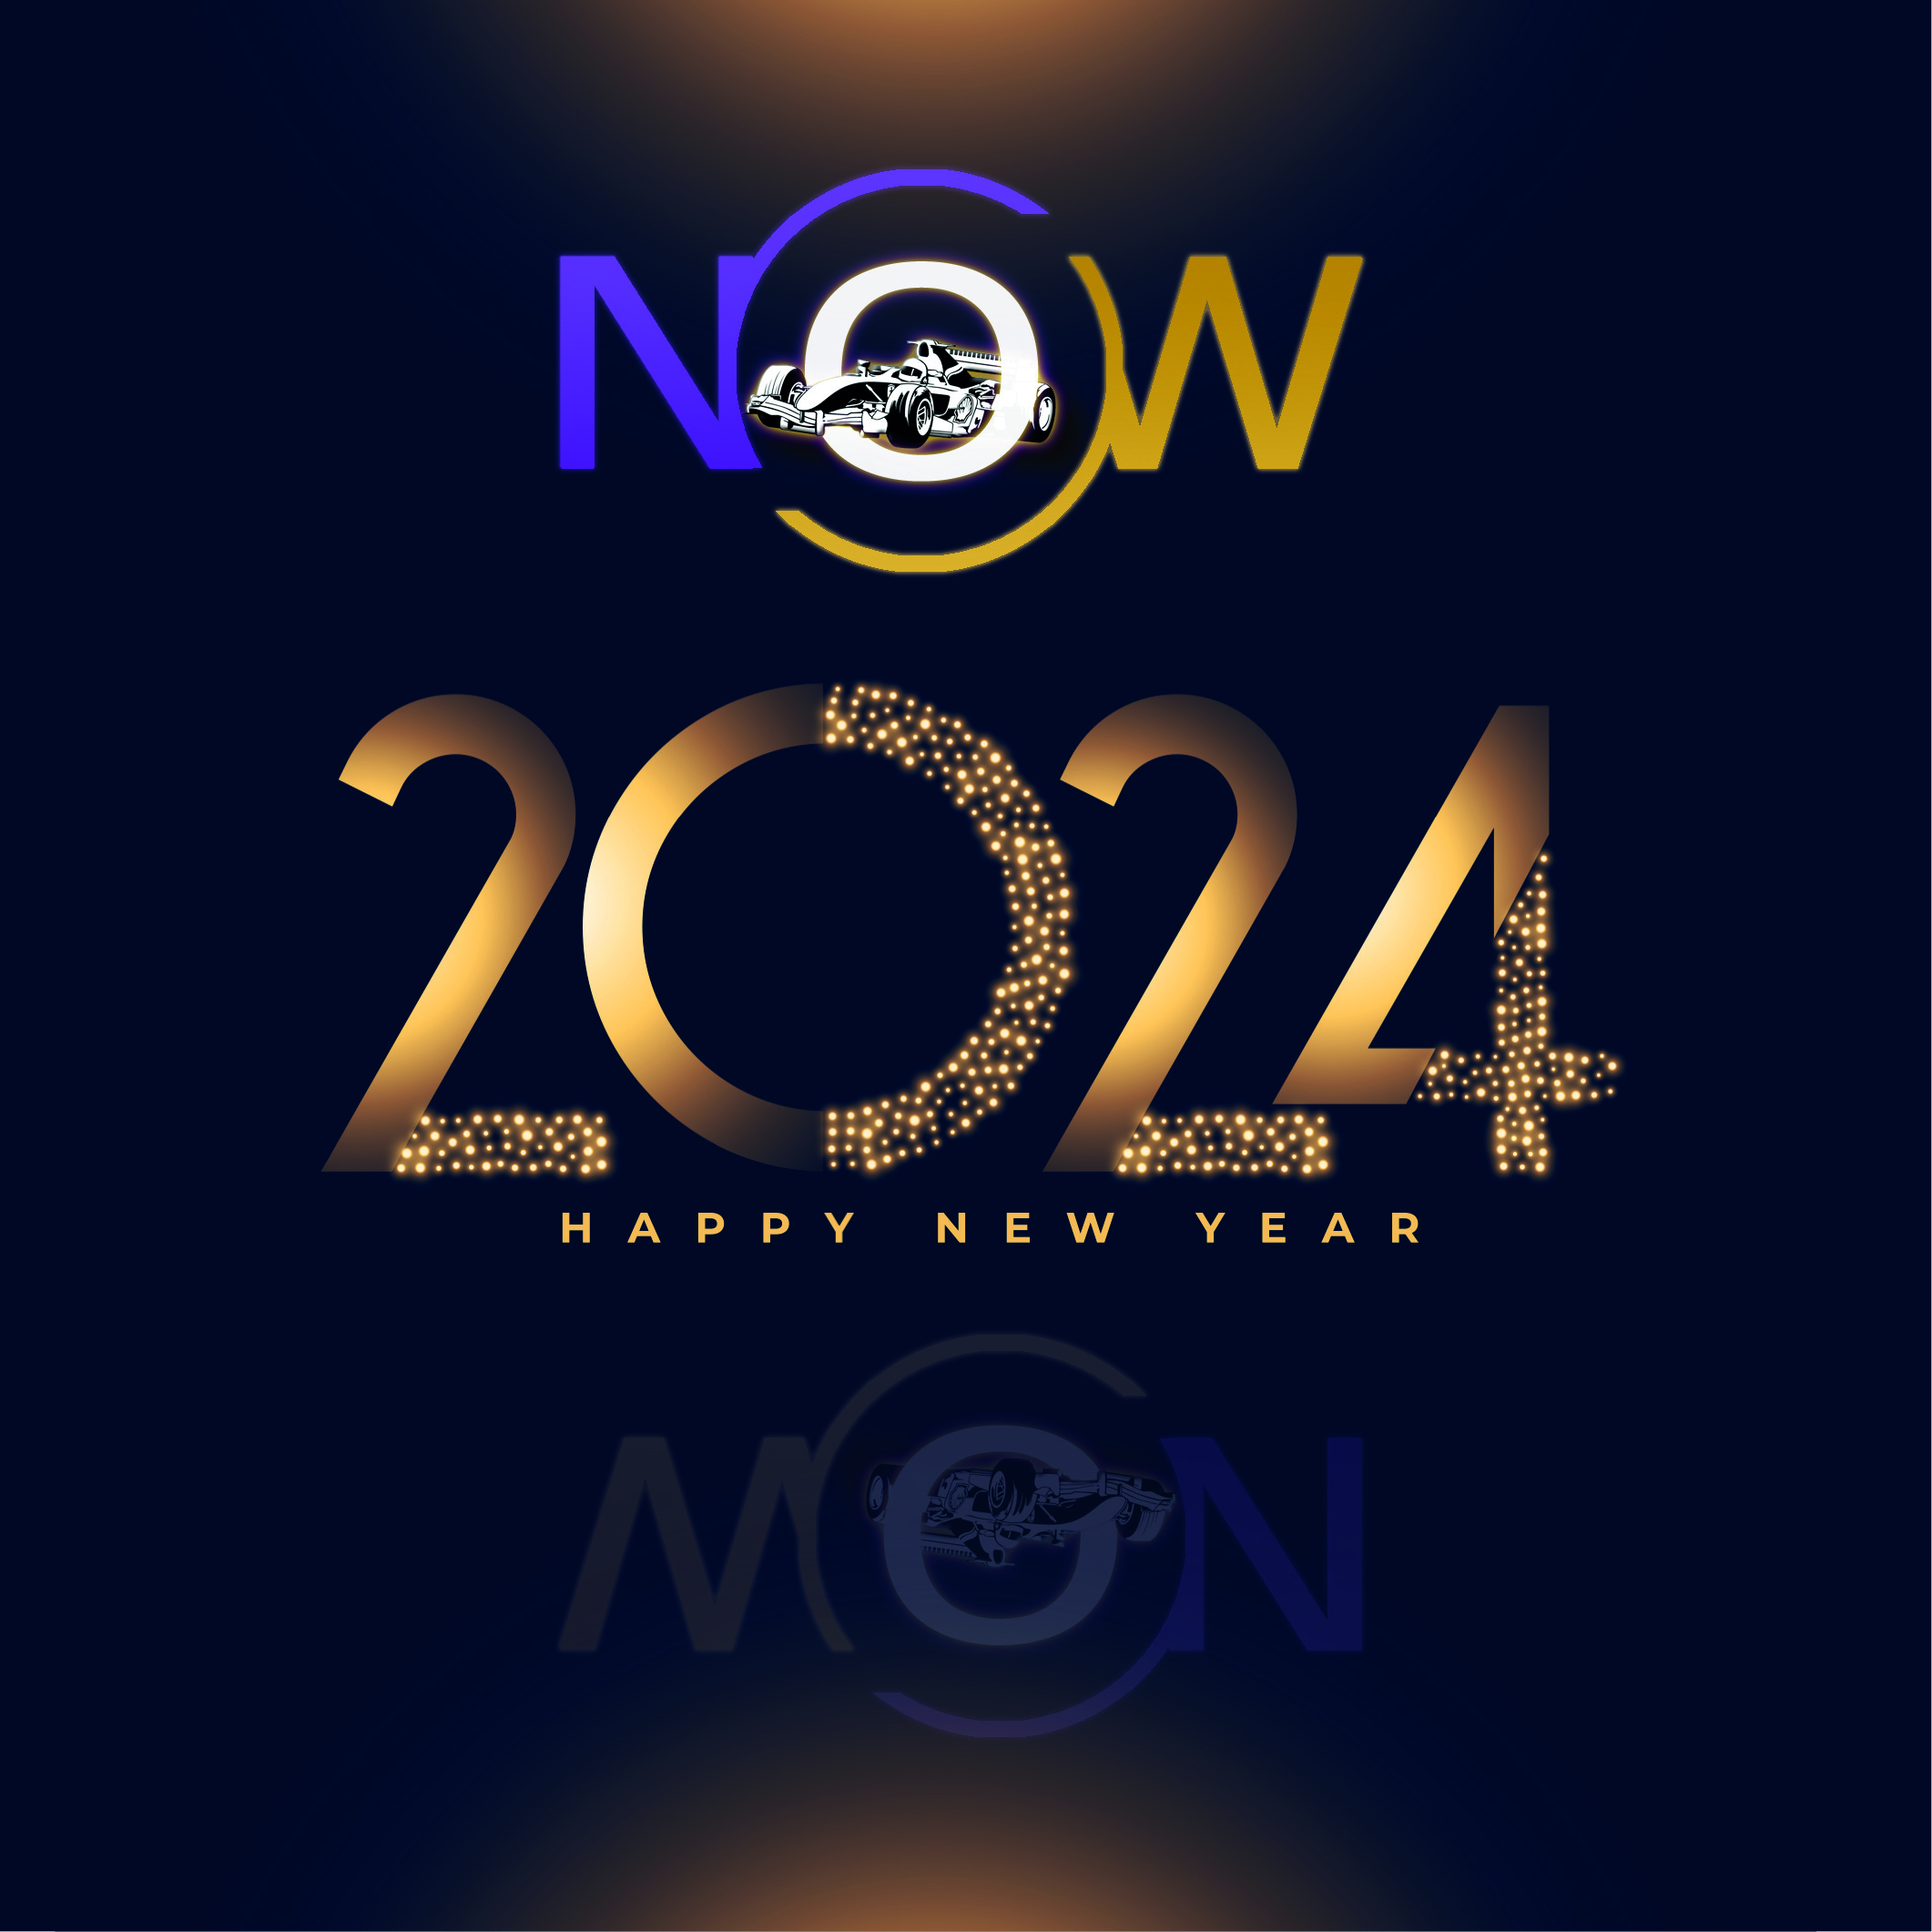 shiny happy new year 2024 wishes background design vector